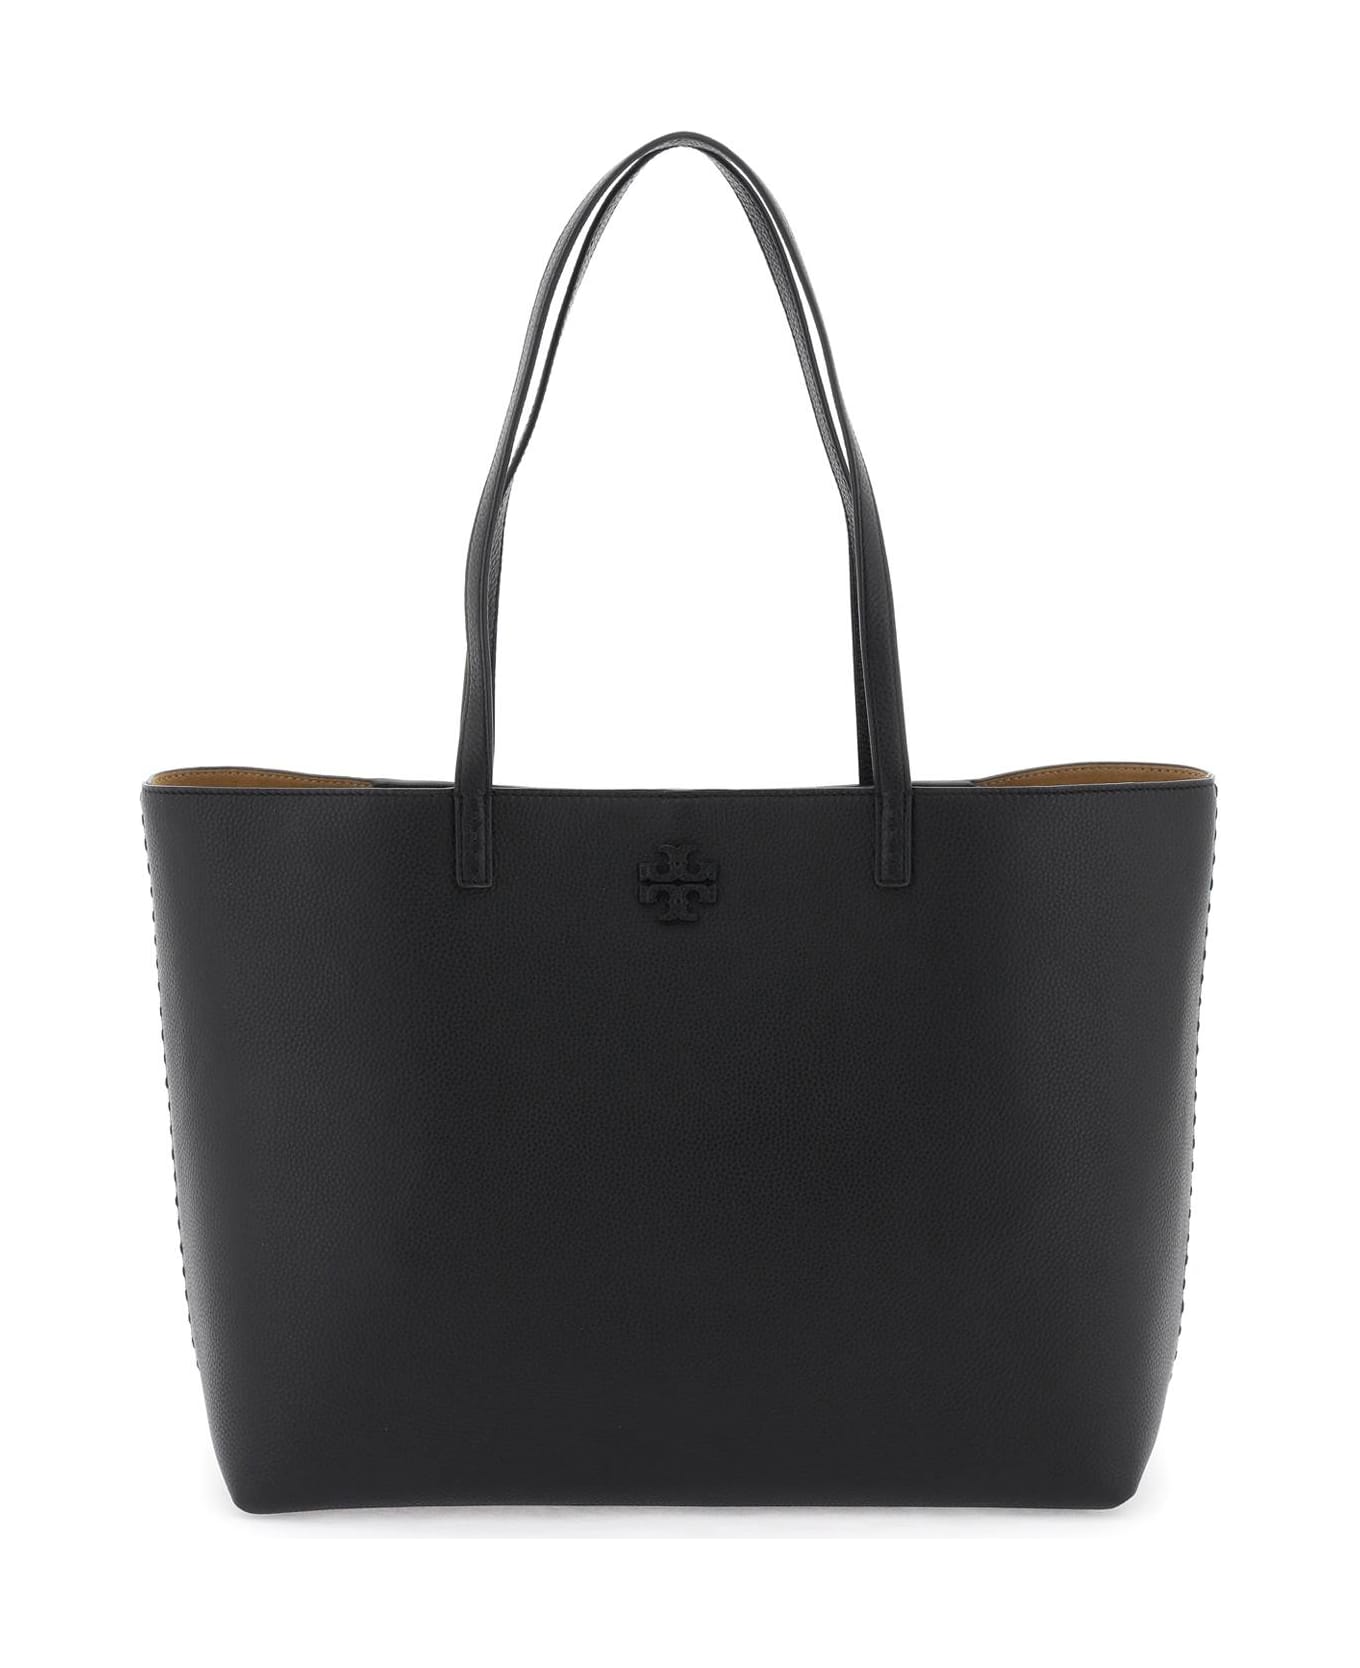 Tory Burch Mcgraw Leather Tote - Black トートバッグ